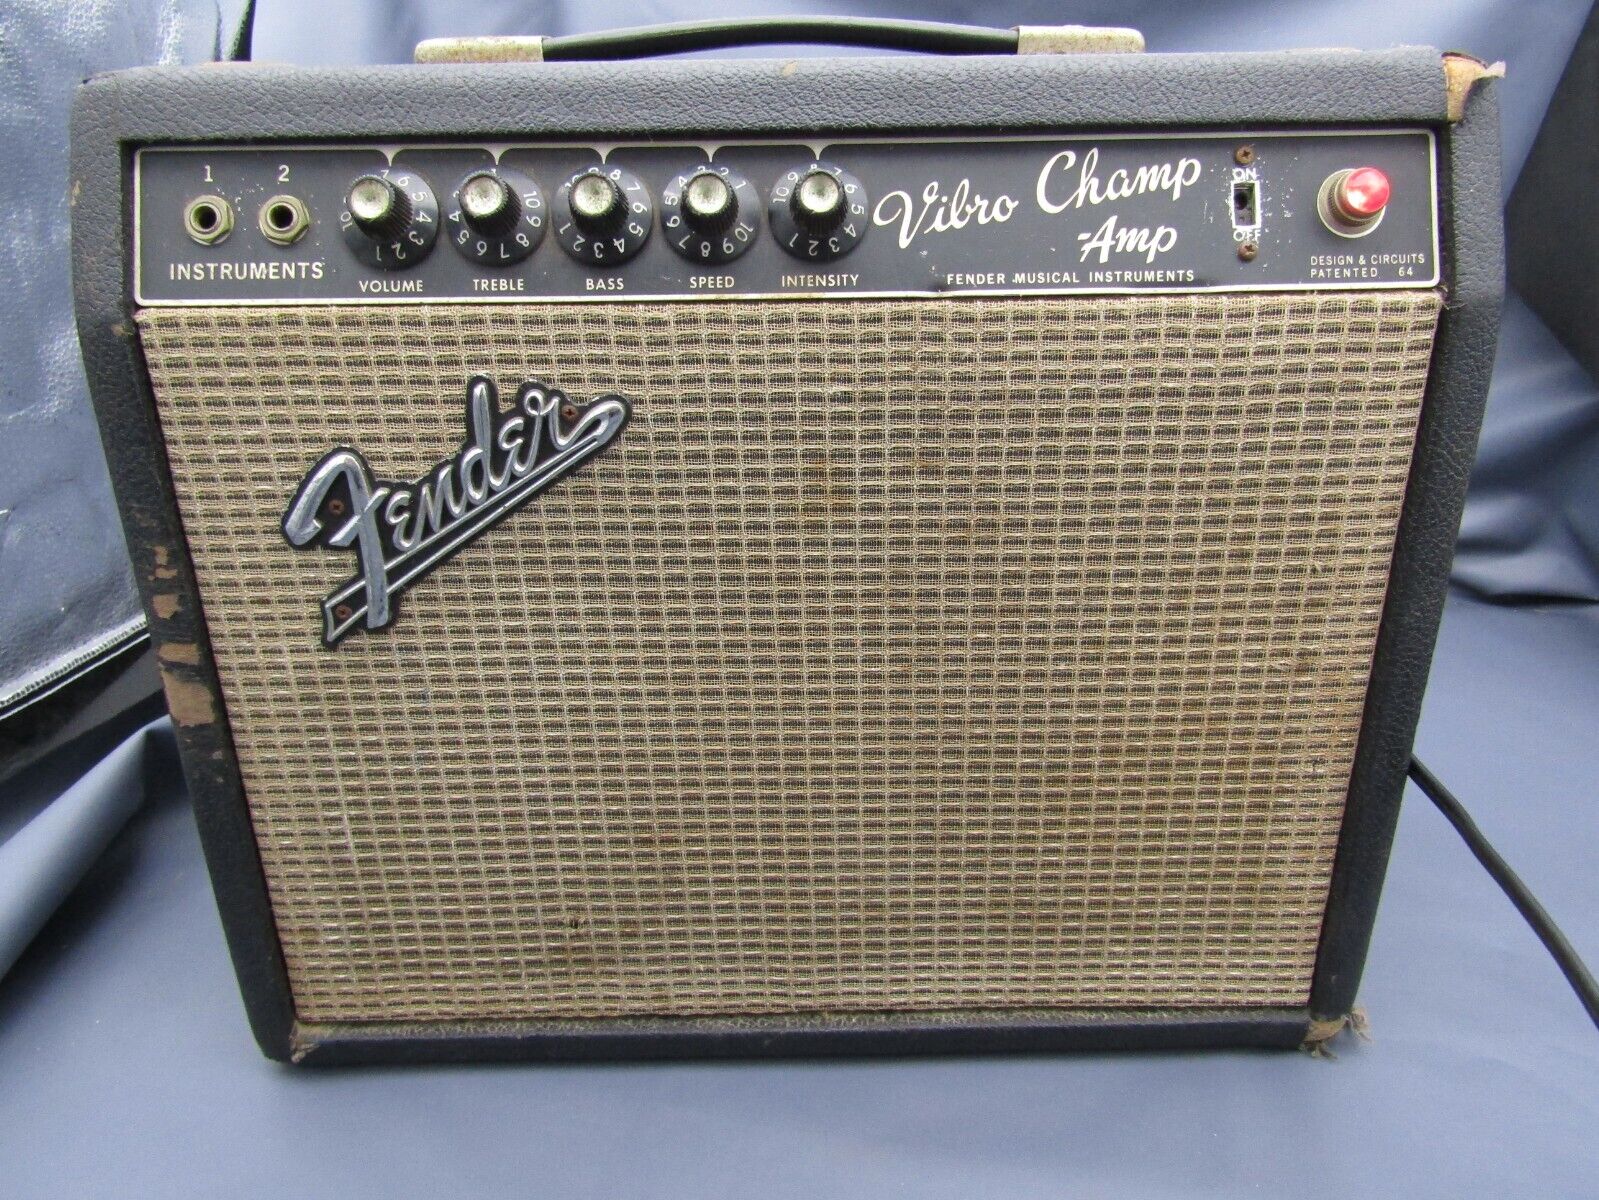 Vintage 1967 Fender Vibro Champ Amp Aa764 Tube Amplifier Made In Usa